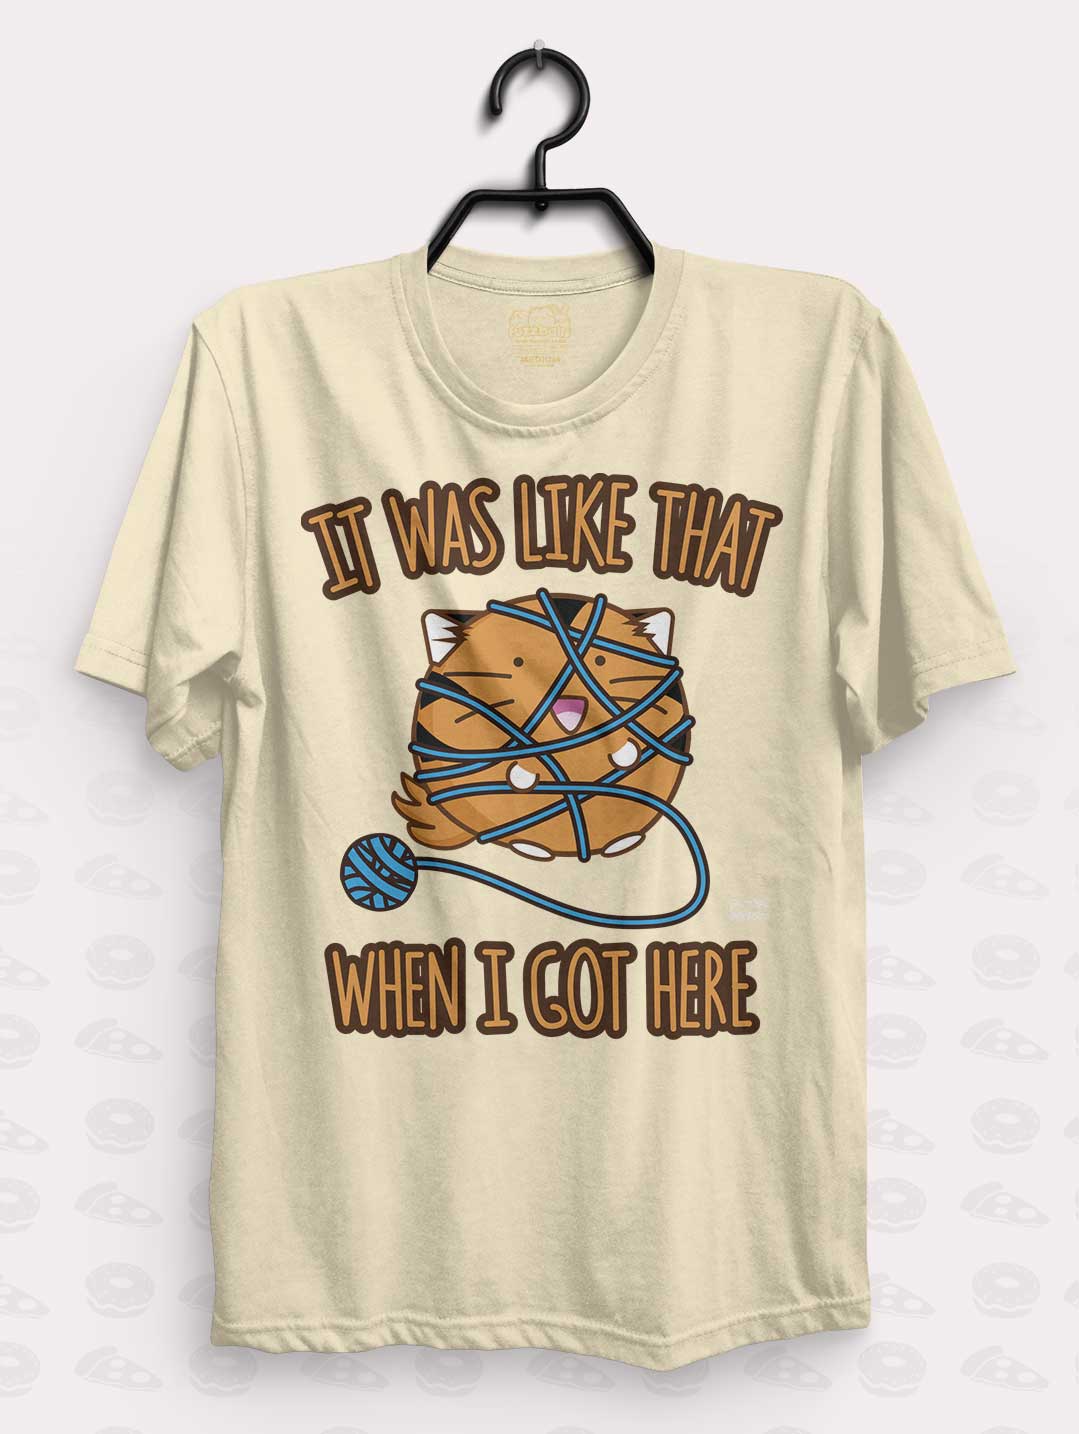 It was Like That When I Got Here Shirt